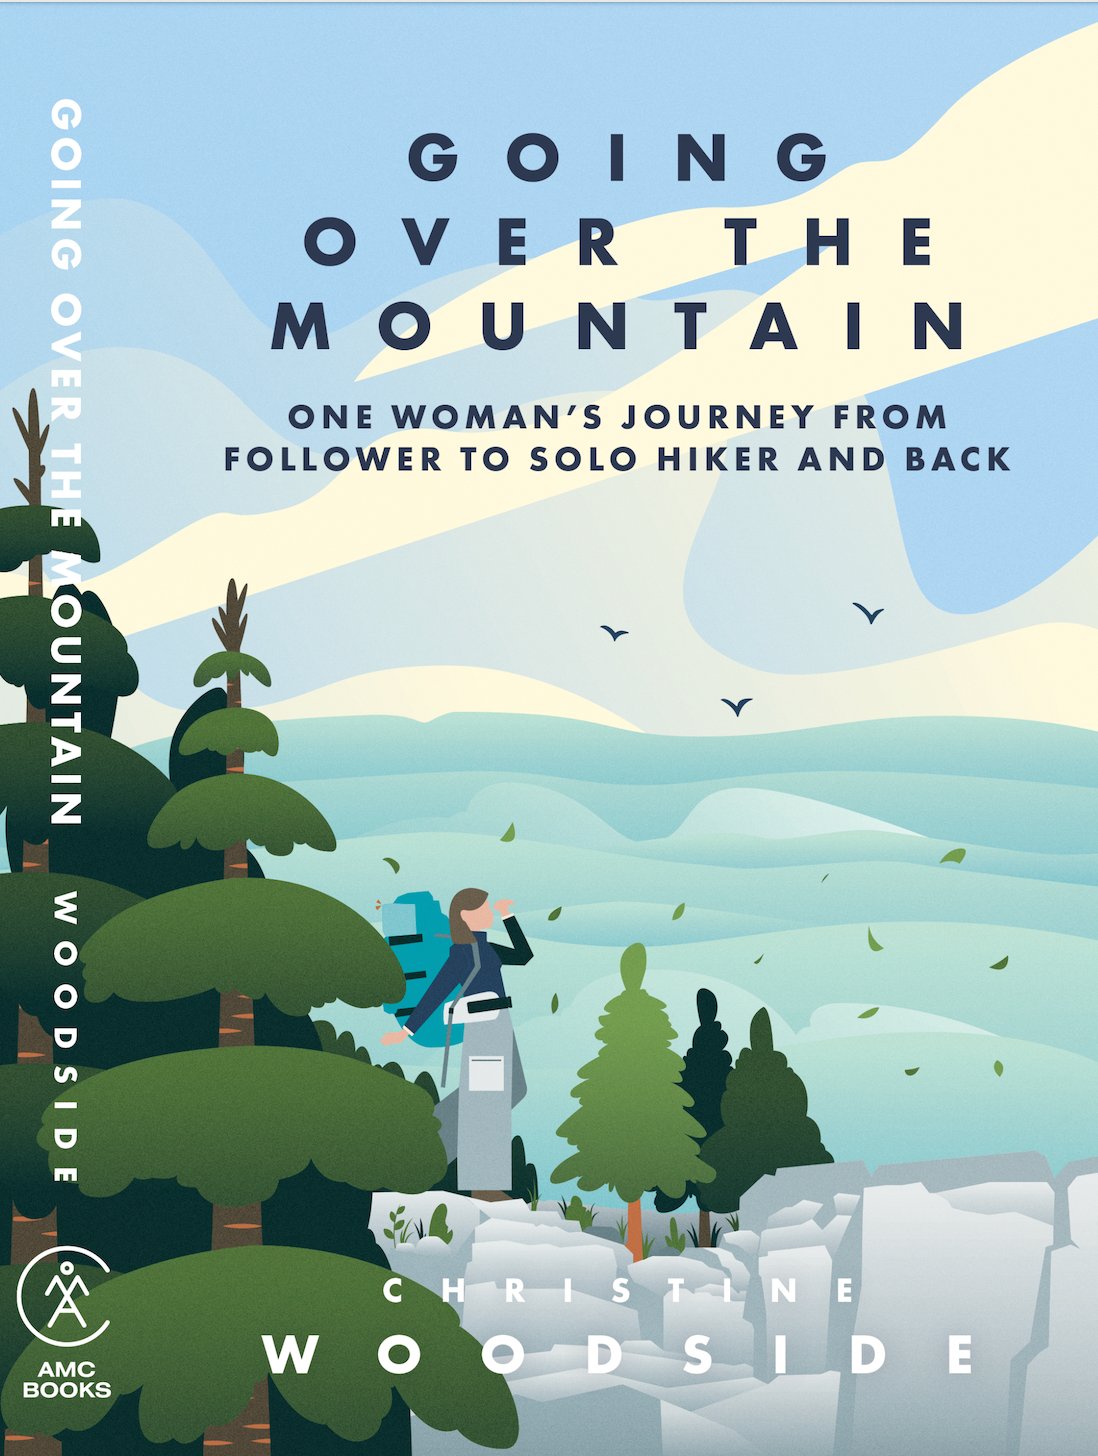 Cover of Chris Woodside’s new book, Going Over the Mountain